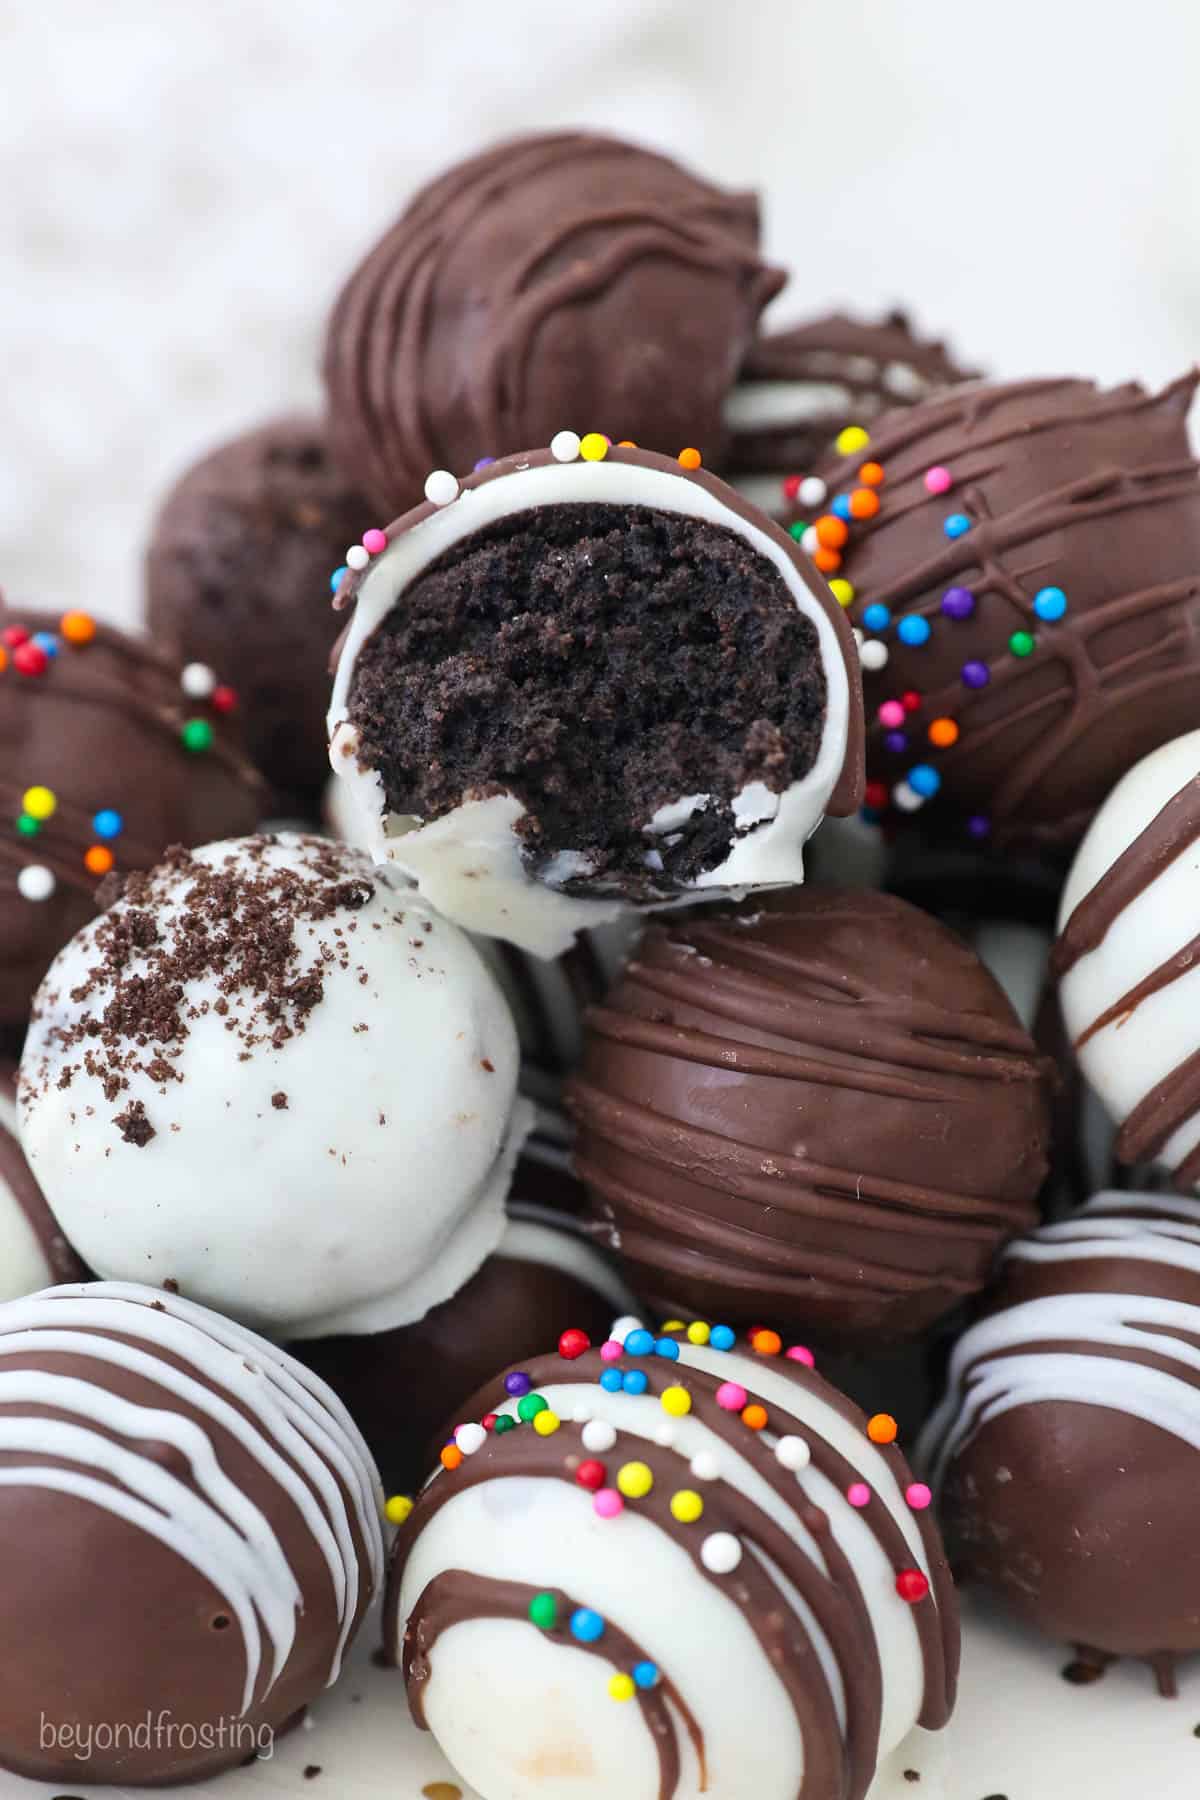 A pile of finished Oreo Truffles on a plate with one cut in half, showing the fudgy Oreo inside.